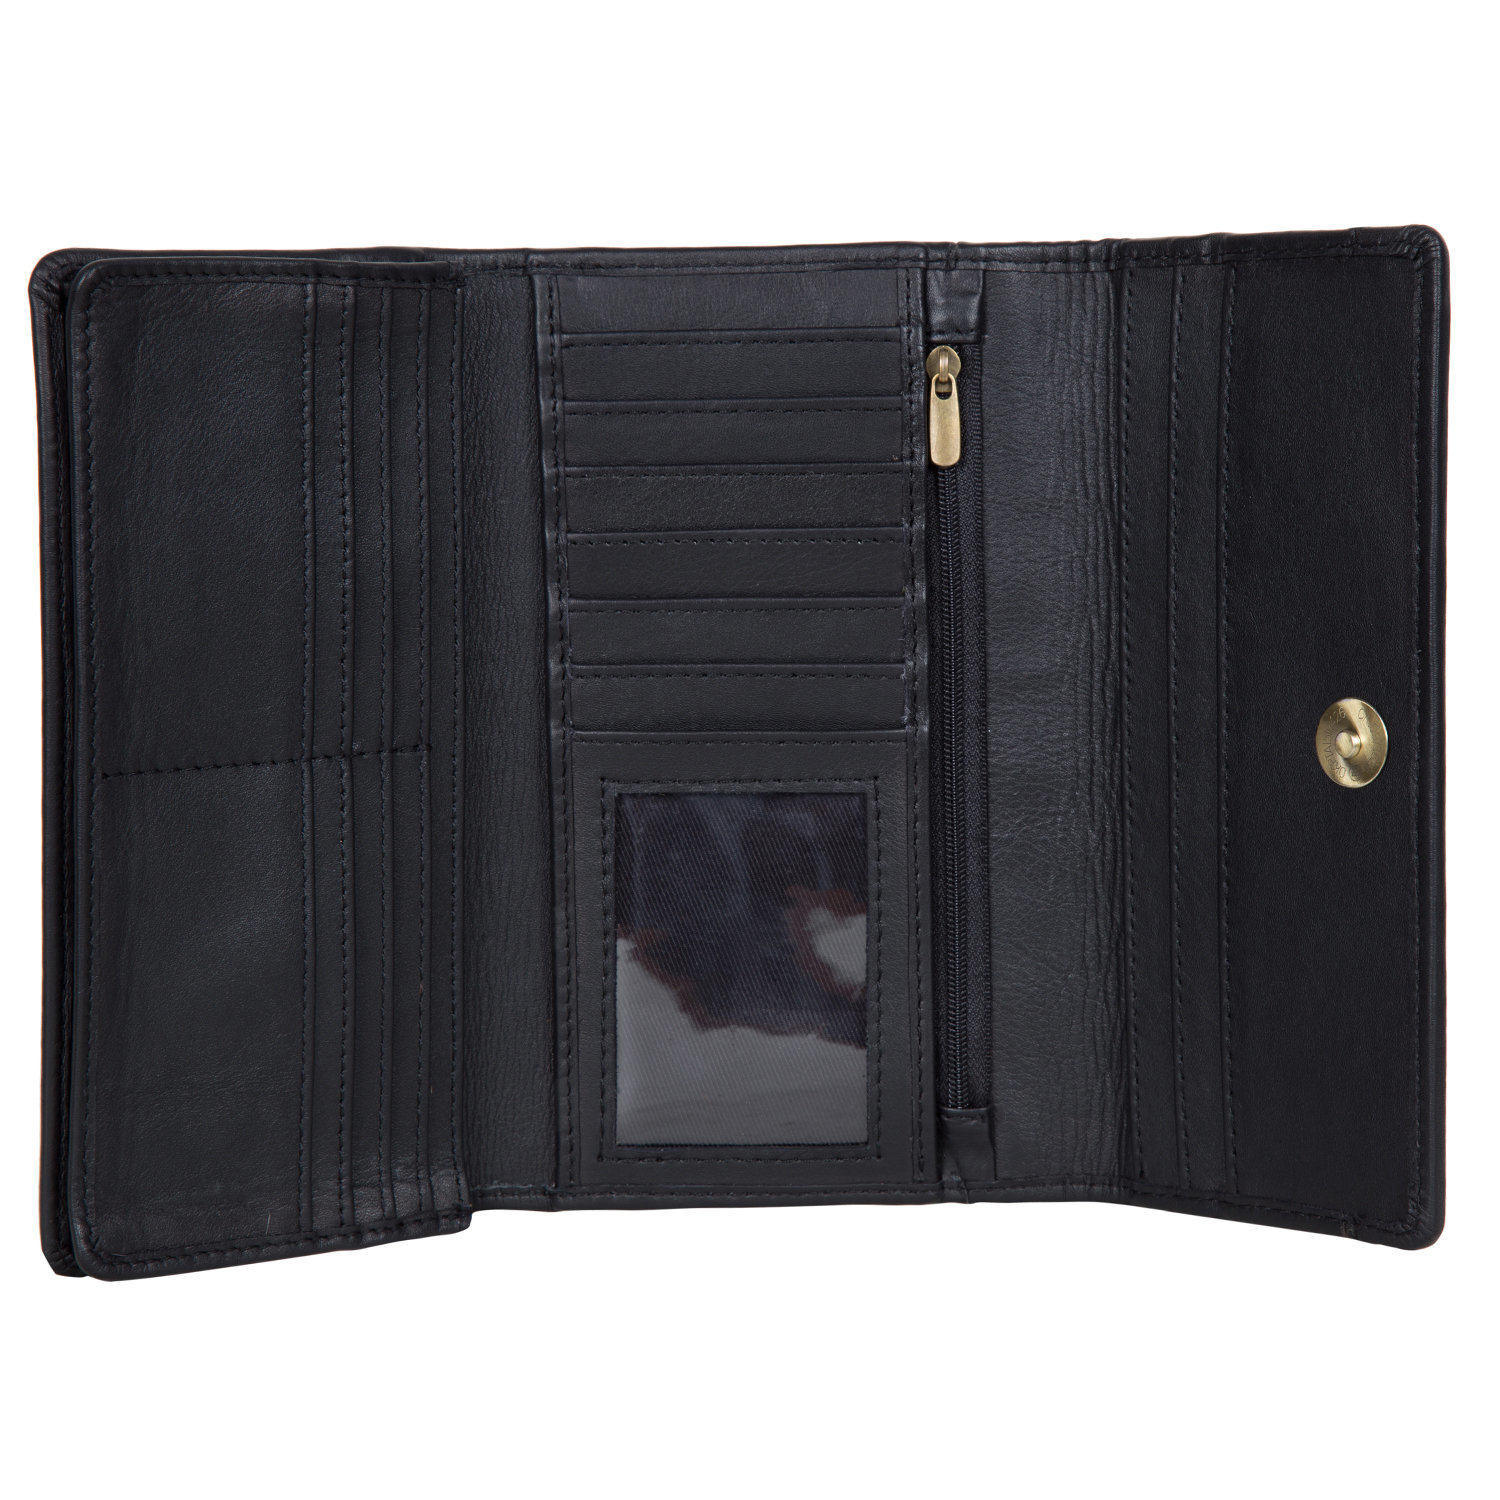 Vegas – Light Black and White Cowhide Trifold Wallet - Best Cowhide ...